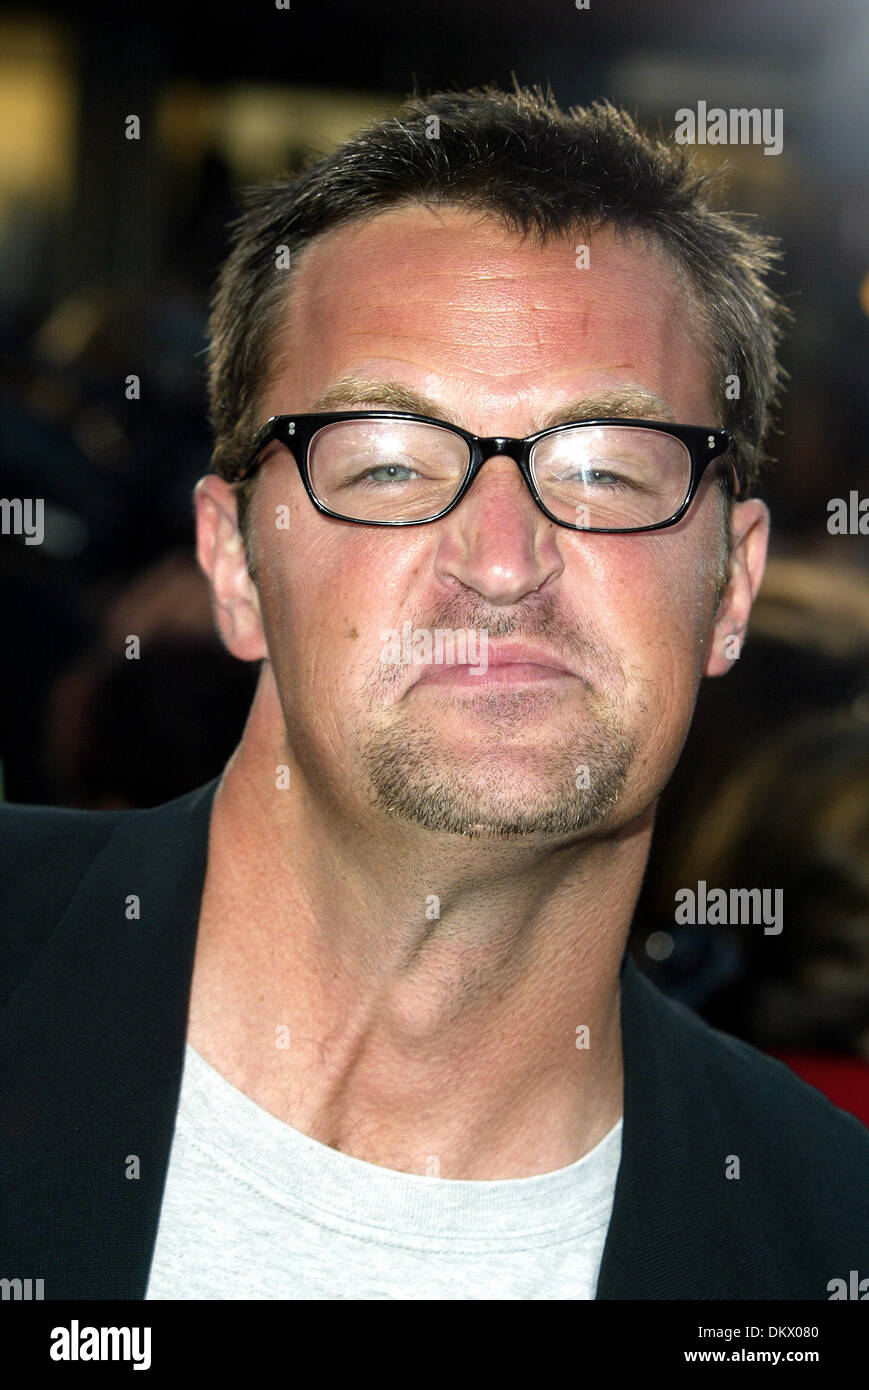 MATTHEW PERRY.ACTOR.WESTWOOD, LOS ANGELES, USA.26/06/2002.LAB5470. Stock Photo